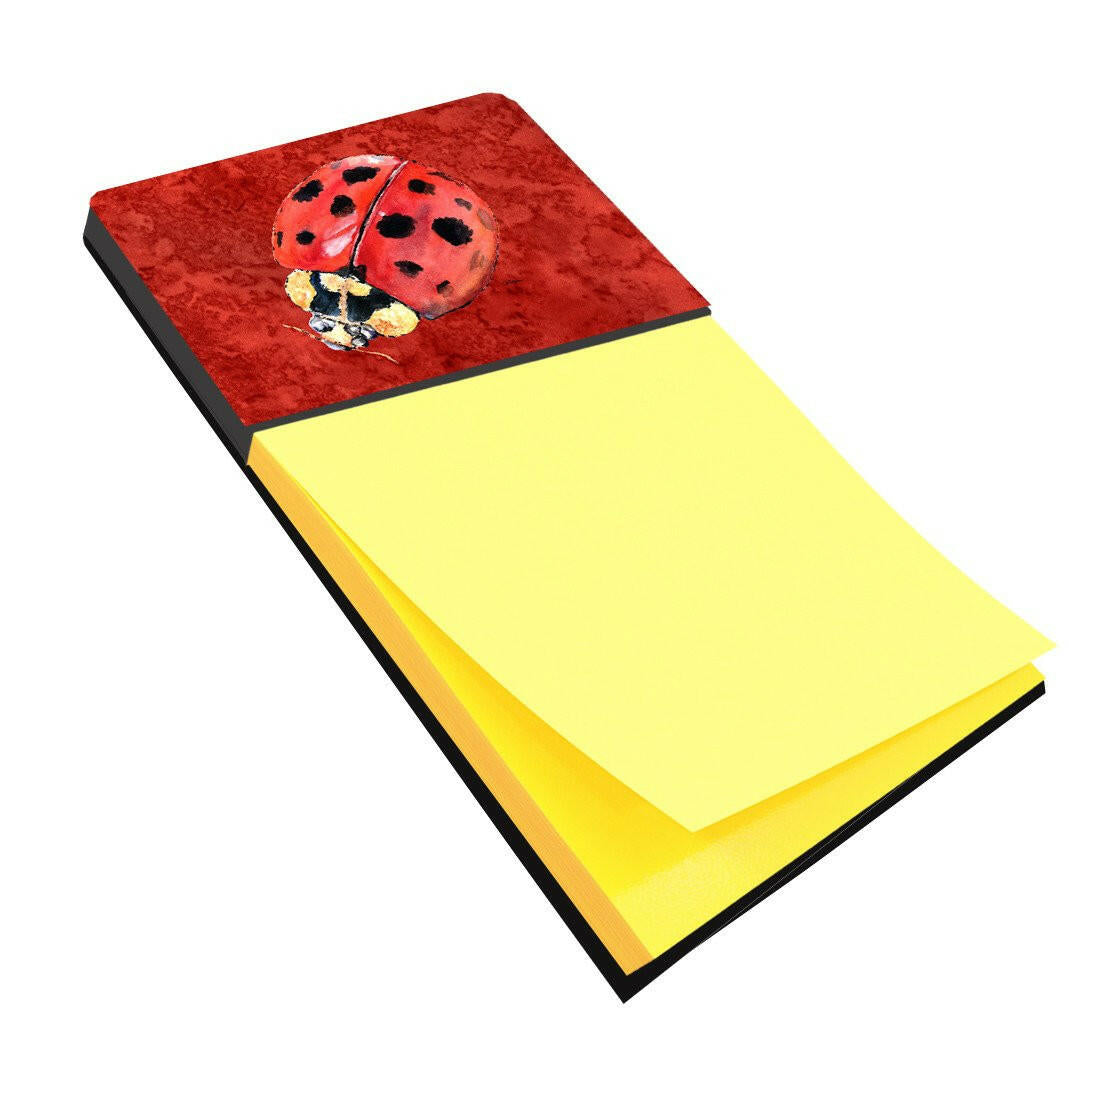 Lady Bug on Deep Red Refiillable Sticky Note Holder or Postit Note Dispenser 8870SN by Caroline's Treasures